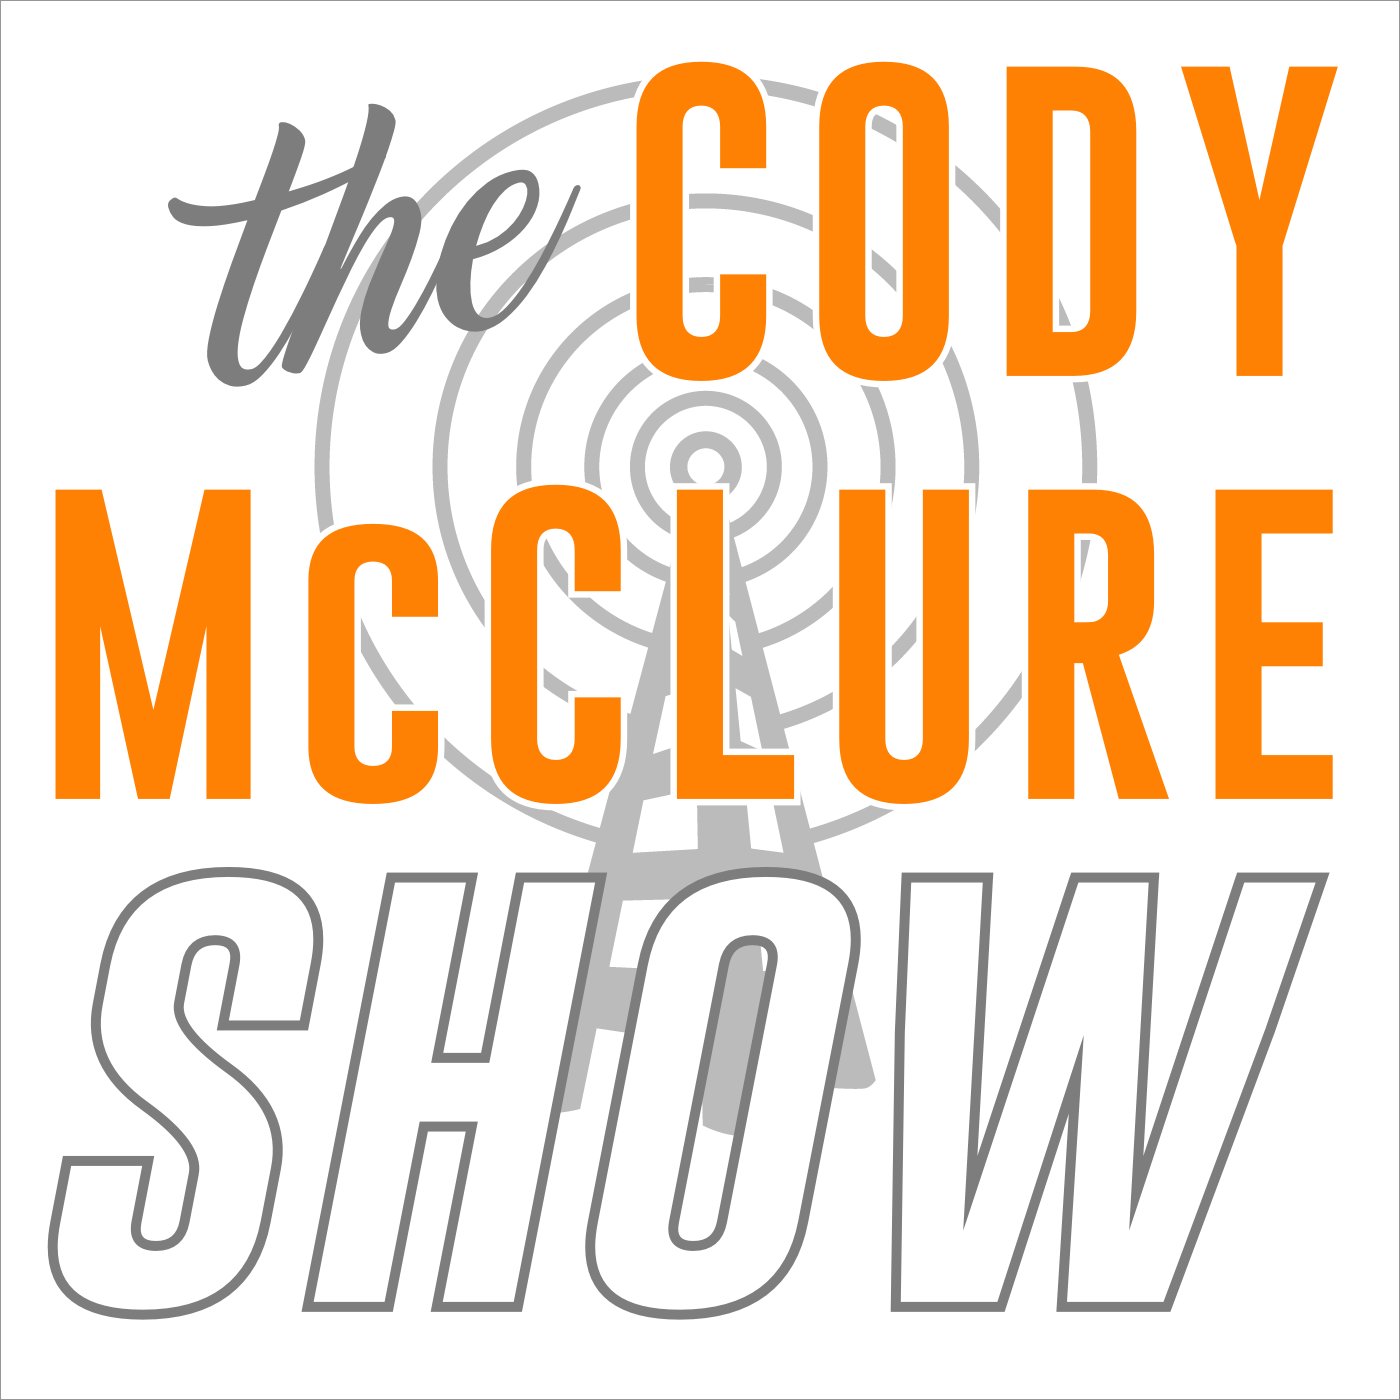 The @CodyMcClureCFB Show hits the airwaves Monday-Friday from 4 to 6 p.m. ET on @1180theVLZ. Produced by @JDNumba3/@calebsouders & partnered with @OandWReport.